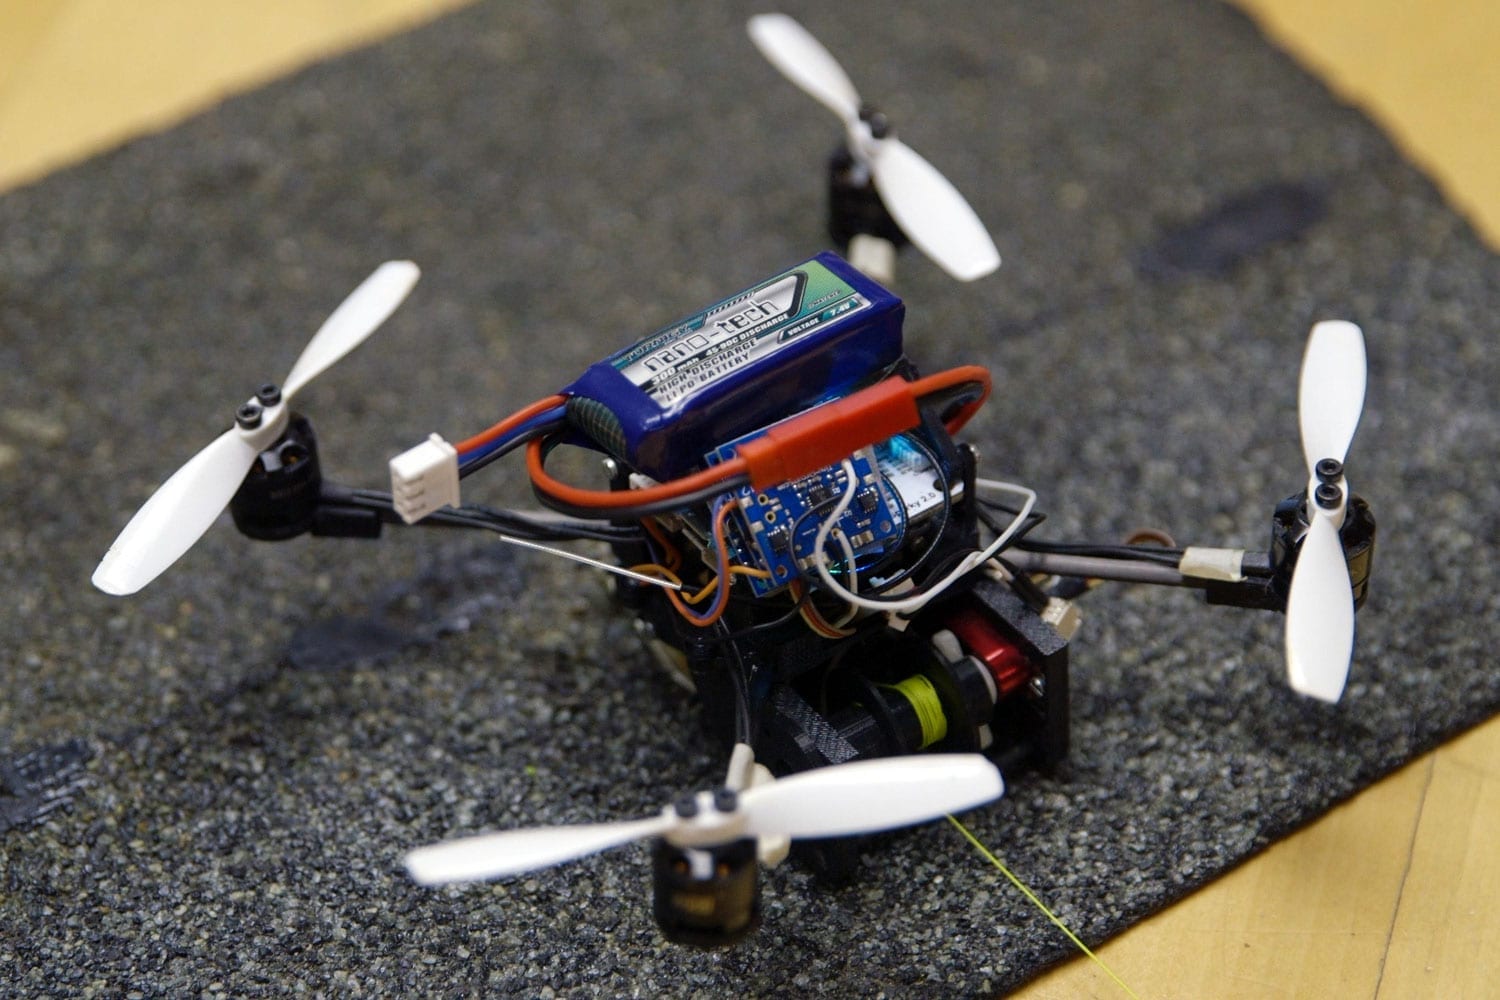 Small flying robots can perch and move objects 40 times their weight